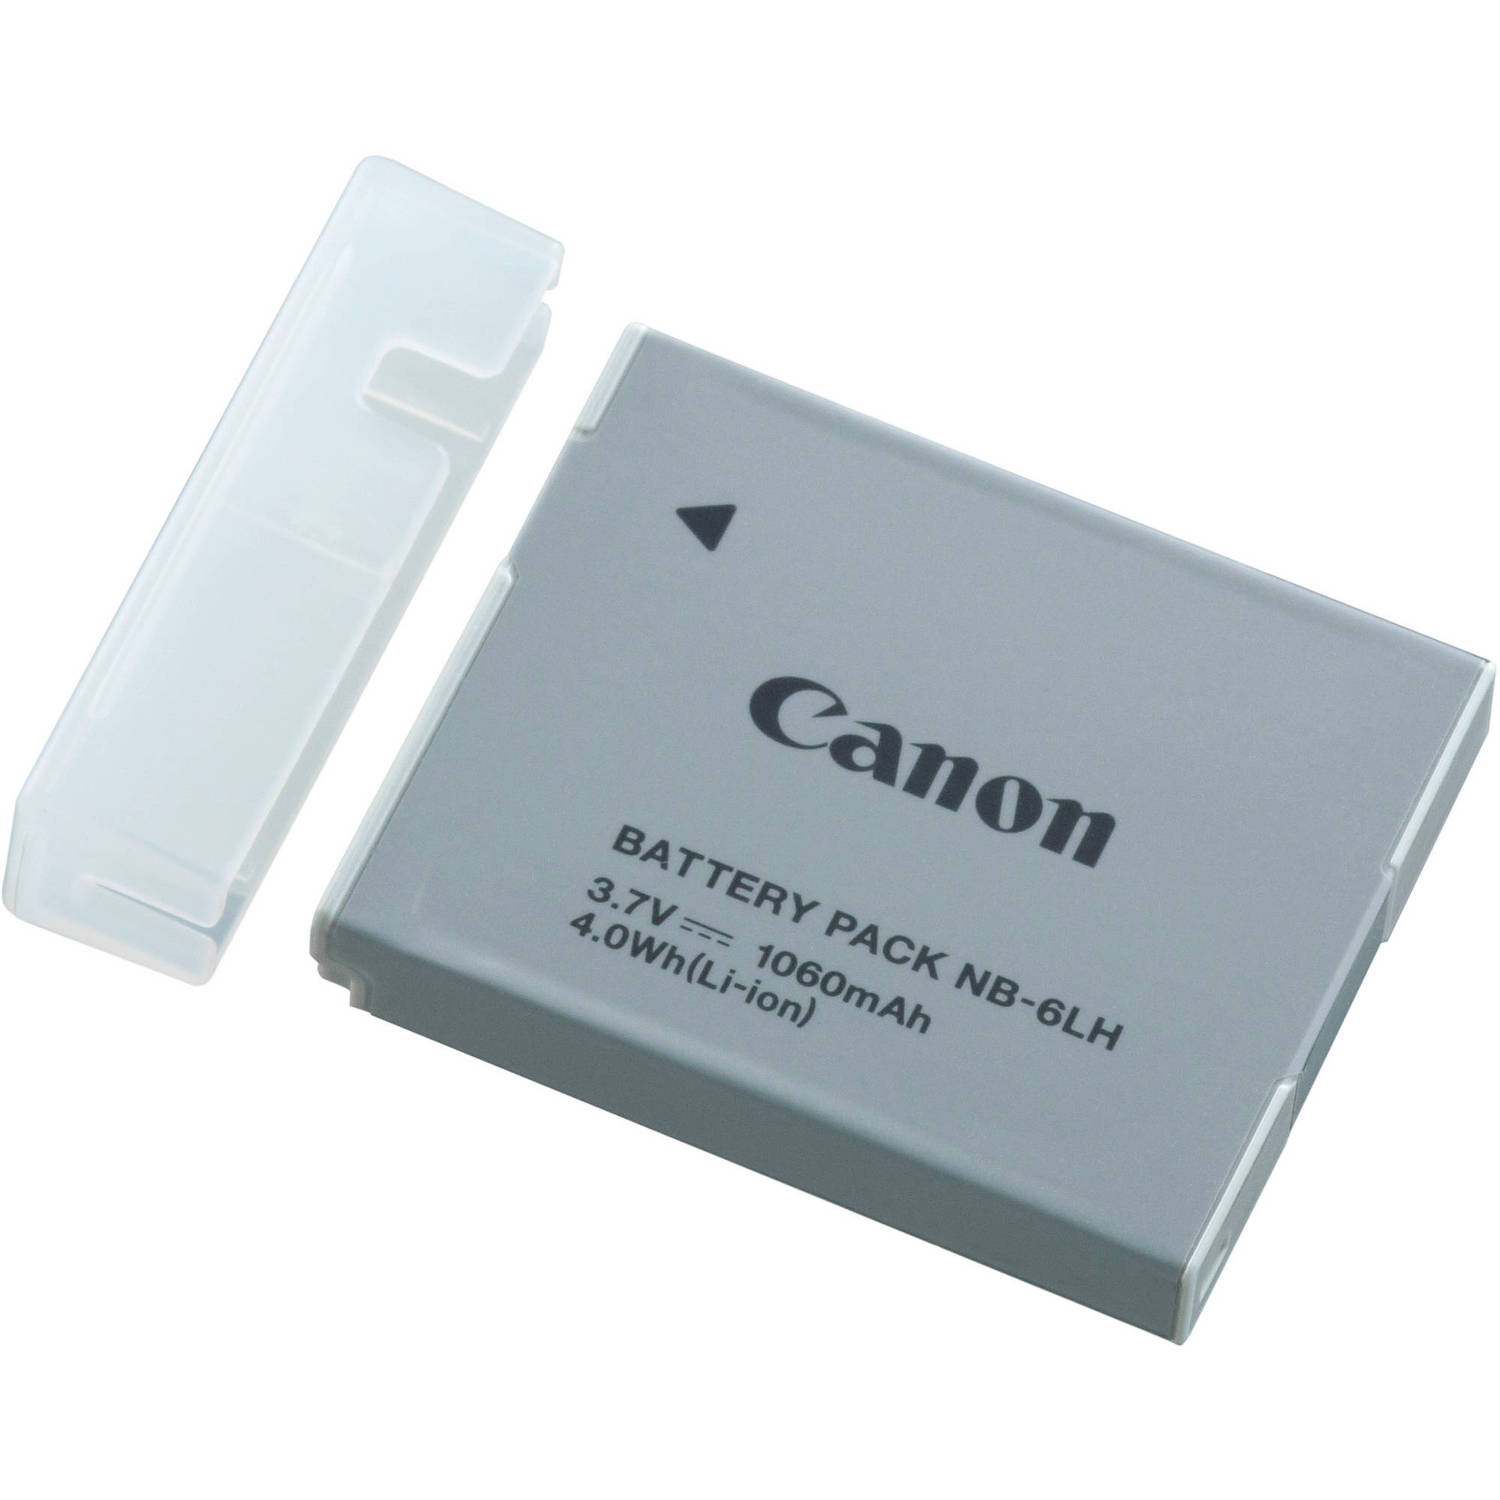 Canon NB-6LH Battery for Powershot SX280 HS, SX500 IS, S120